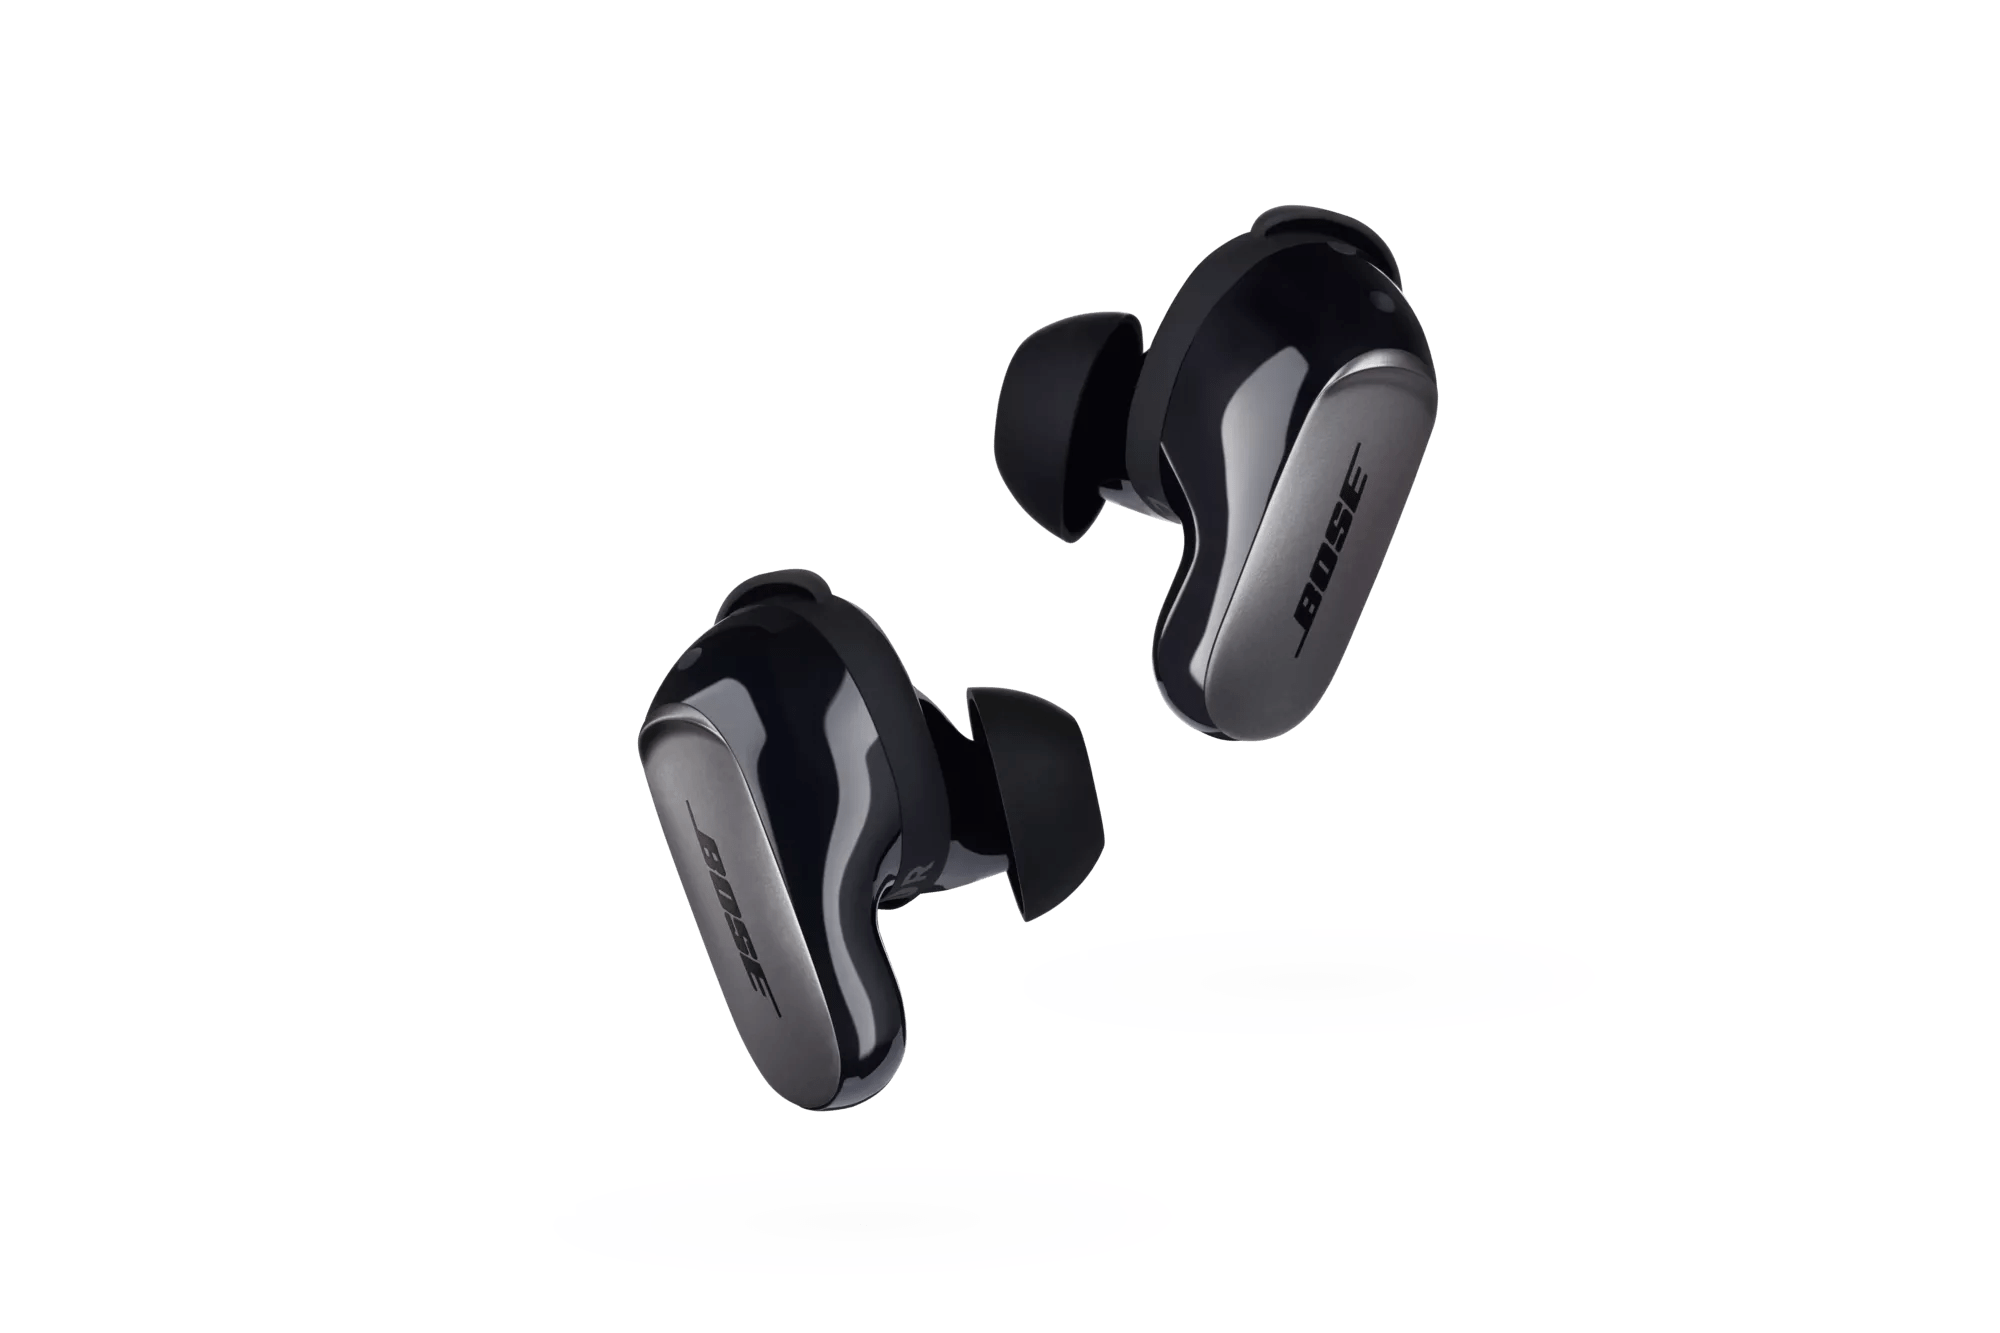 Product Support for Bose Earbuds